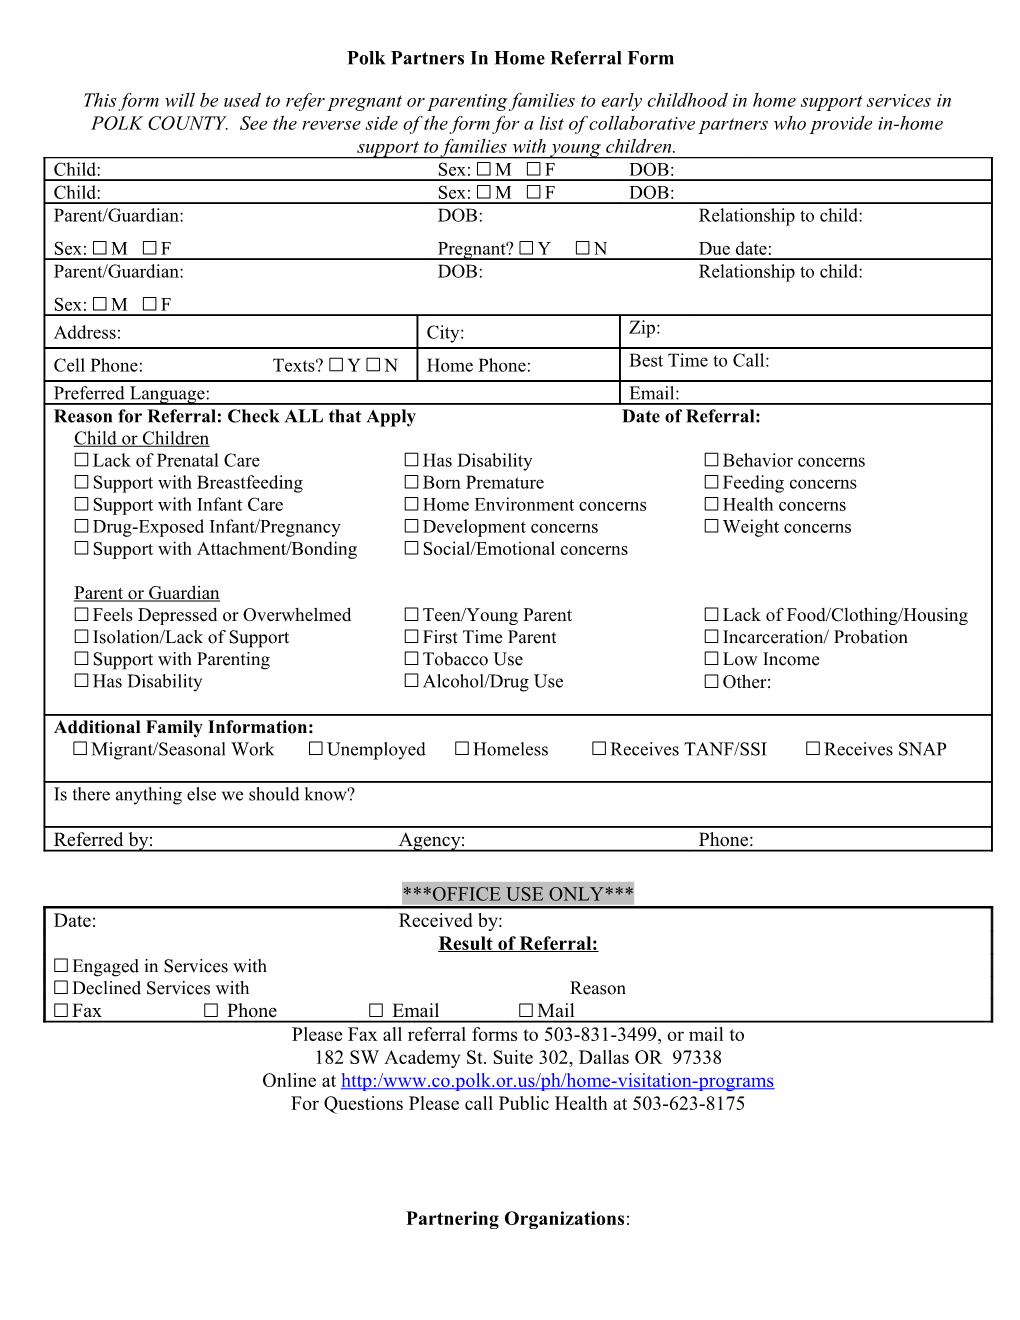 Polk Partners in Home Referral Form